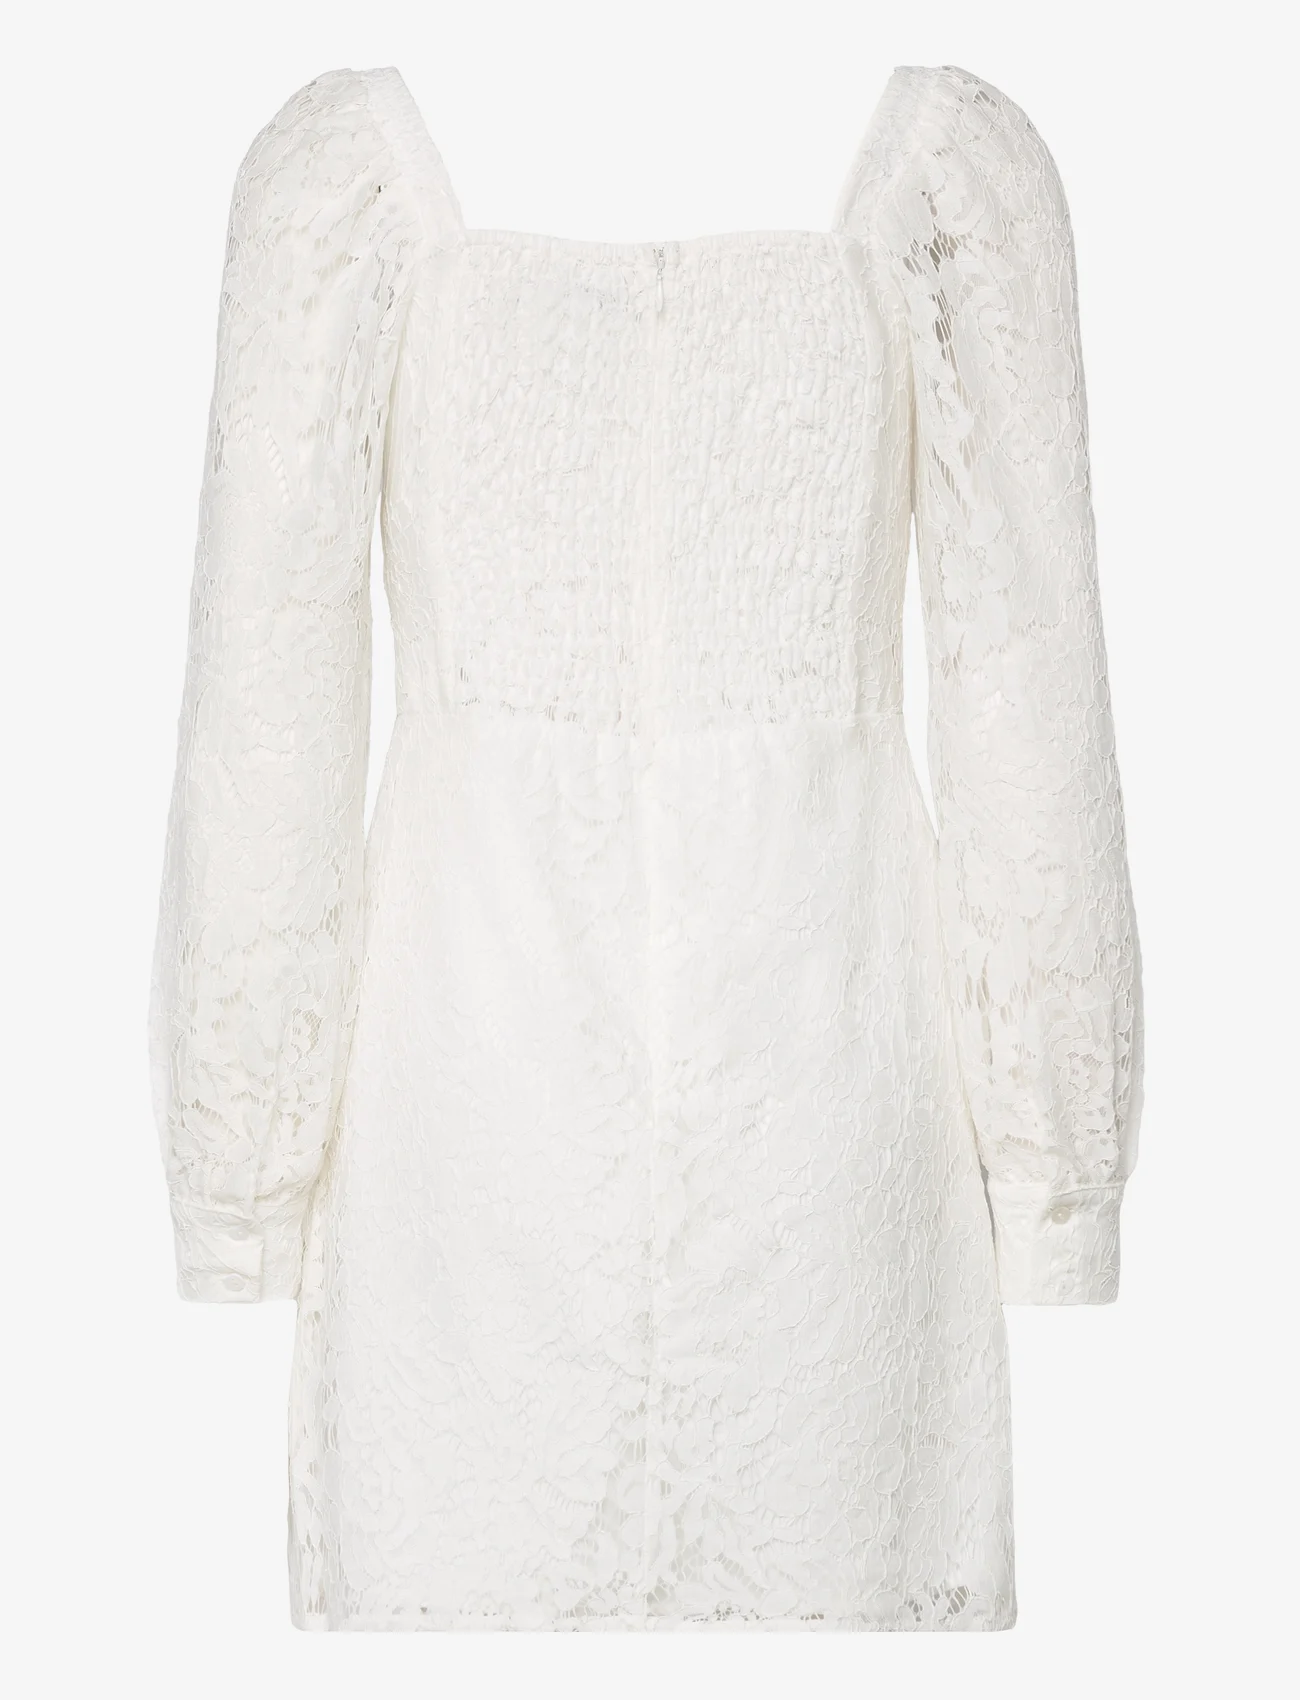 French Connection - ATREENA LACE MINI DRESS - summer dresses - summer white - 1